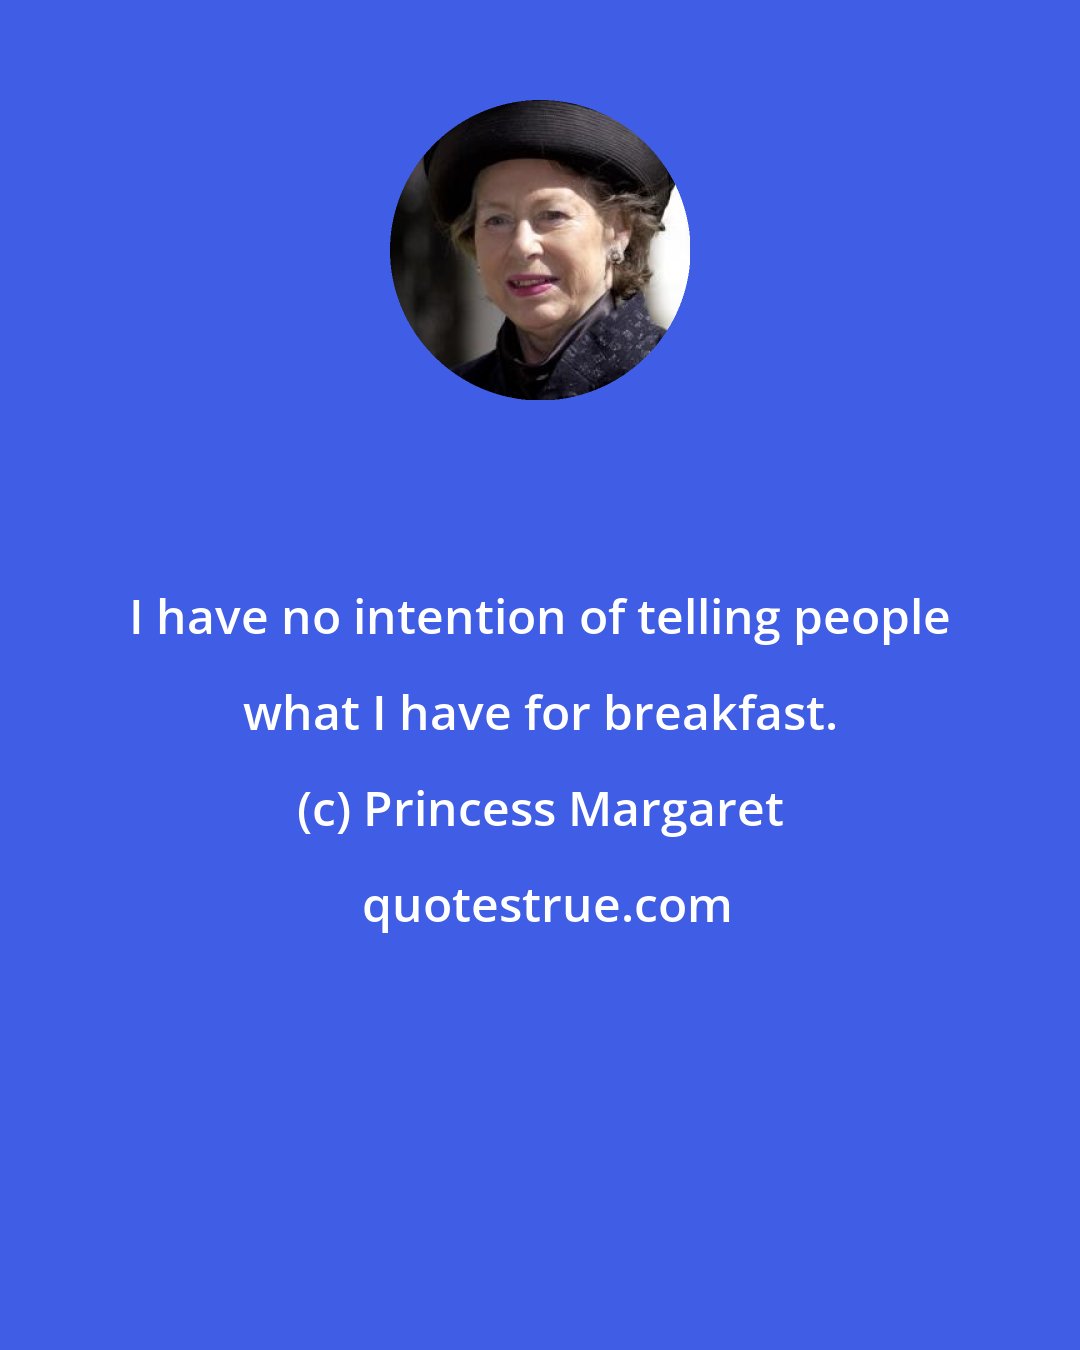 Princess Margaret: I have no intention of telling people what I have for breakfast.